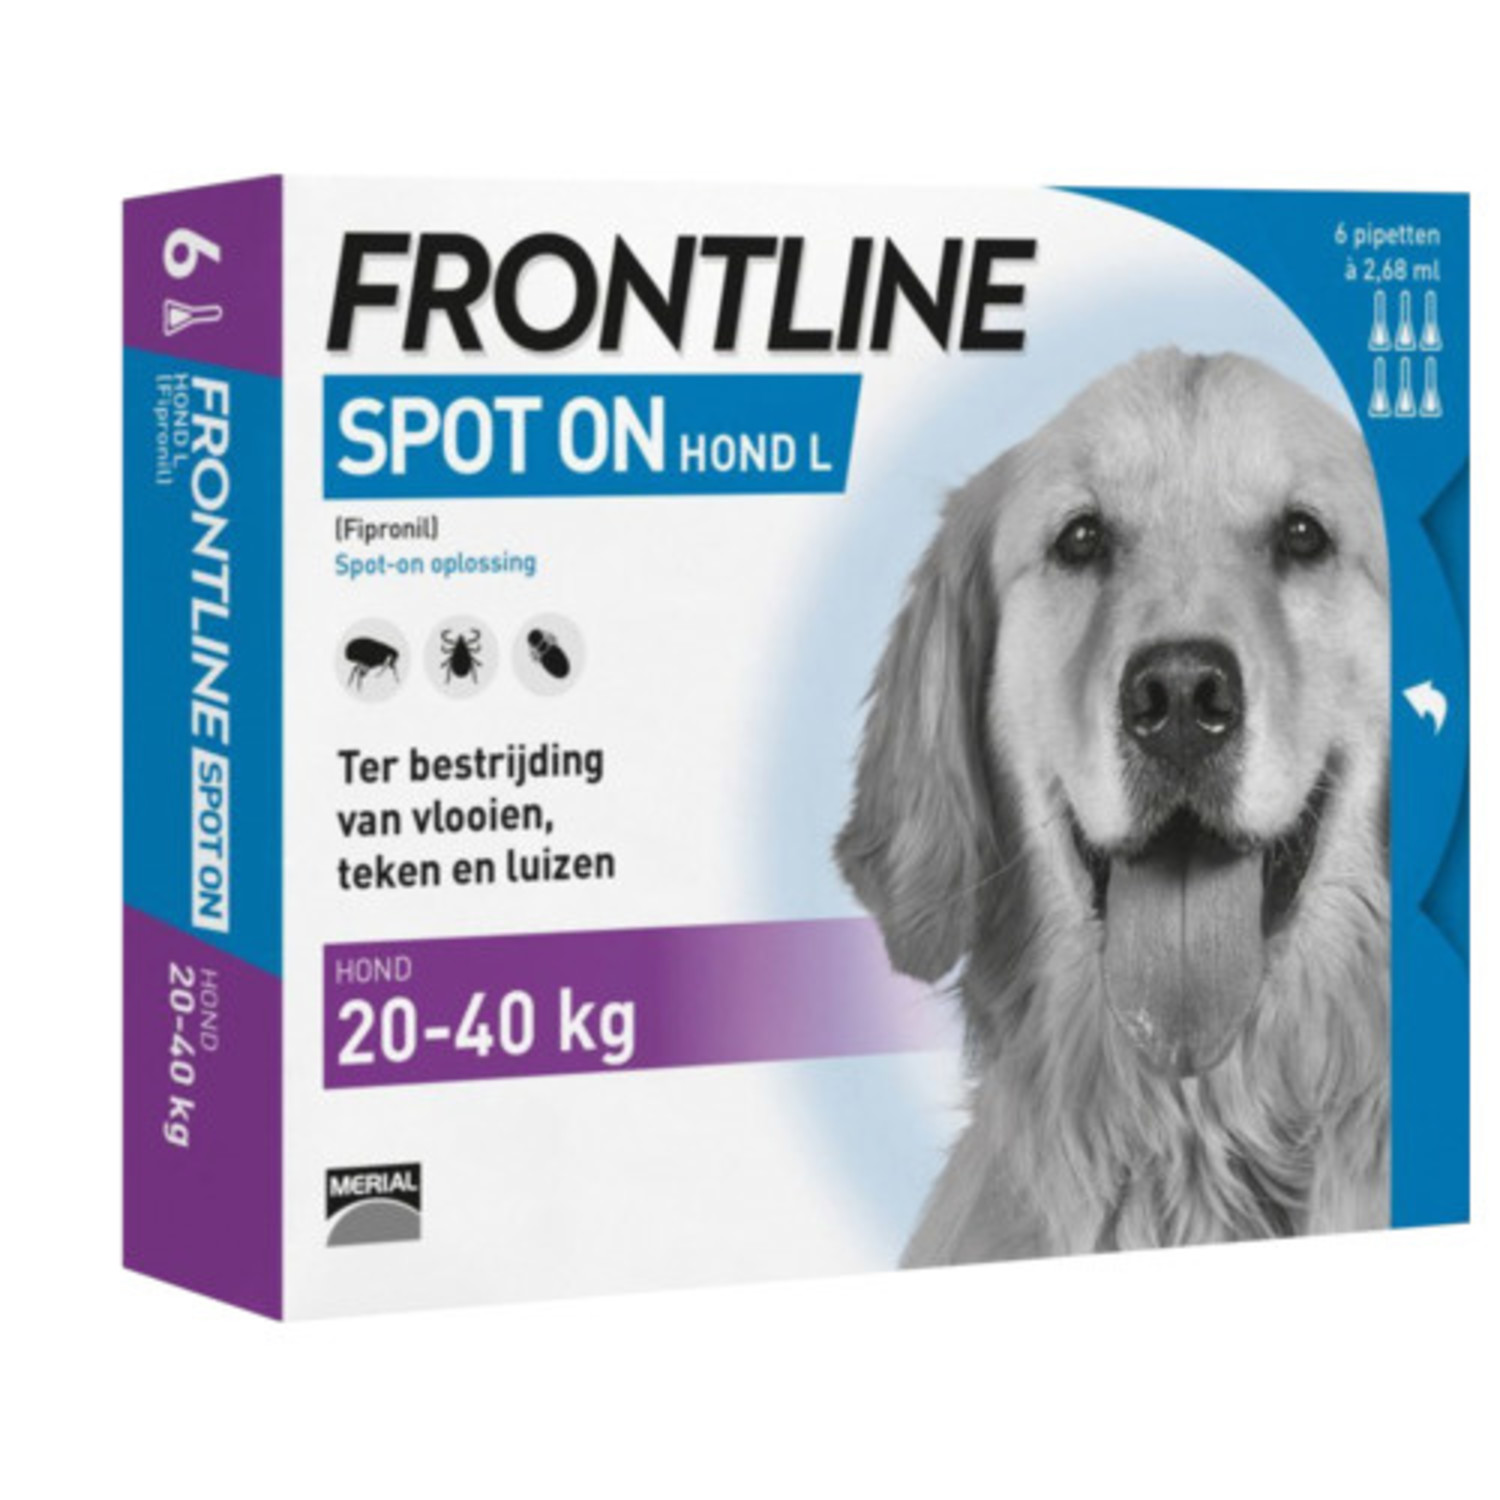 Extra lus Plasticiteit Frontline Spot On Hond L (20 tot 40 kg) 6 pipetten - Agridiscounter